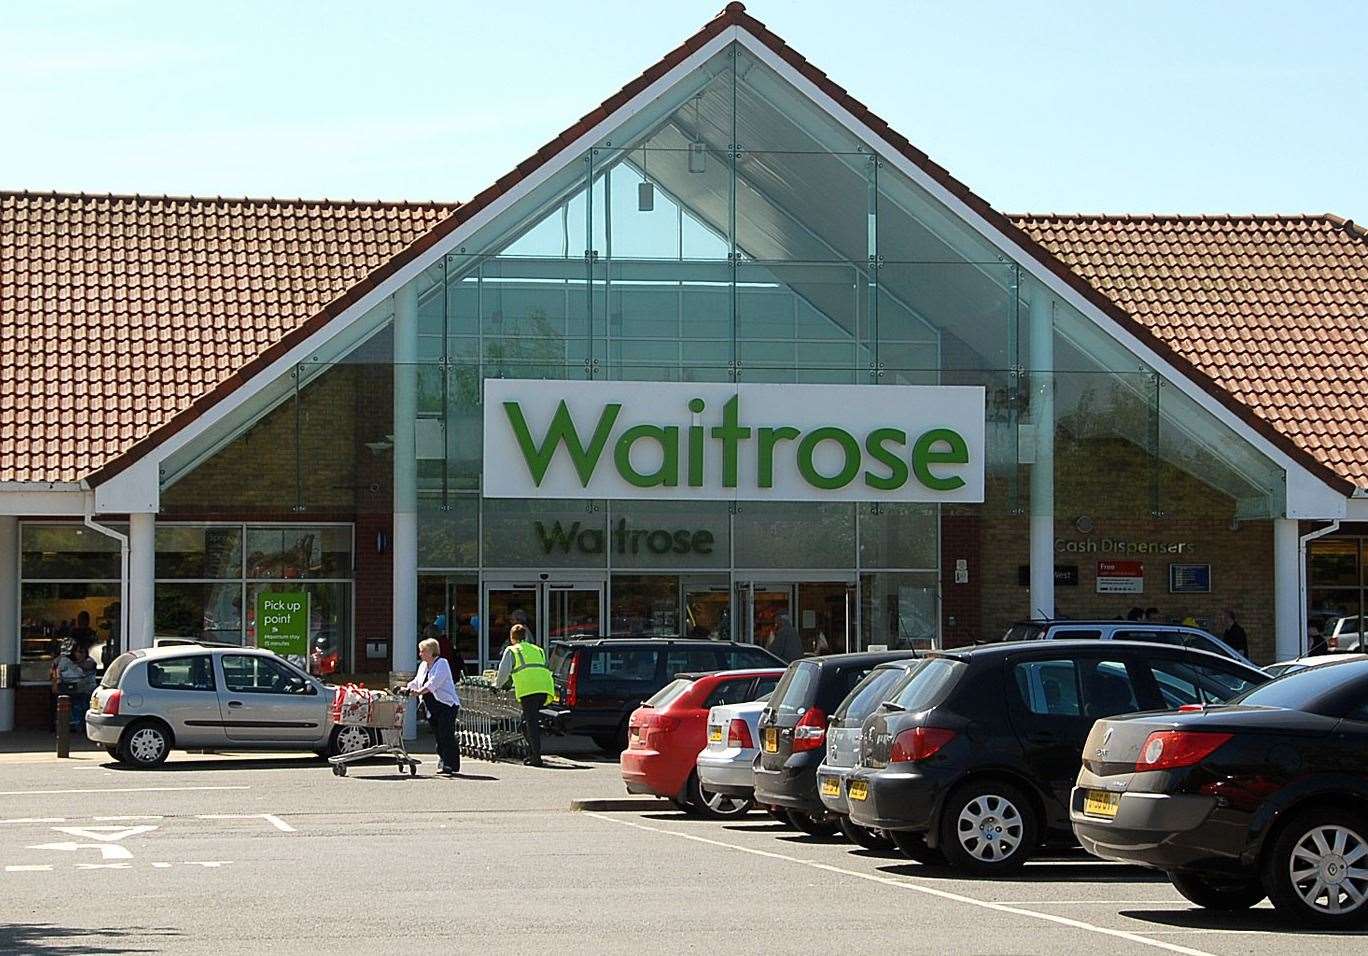 Free hot drinks are among the perks for cardholders at Waitrose